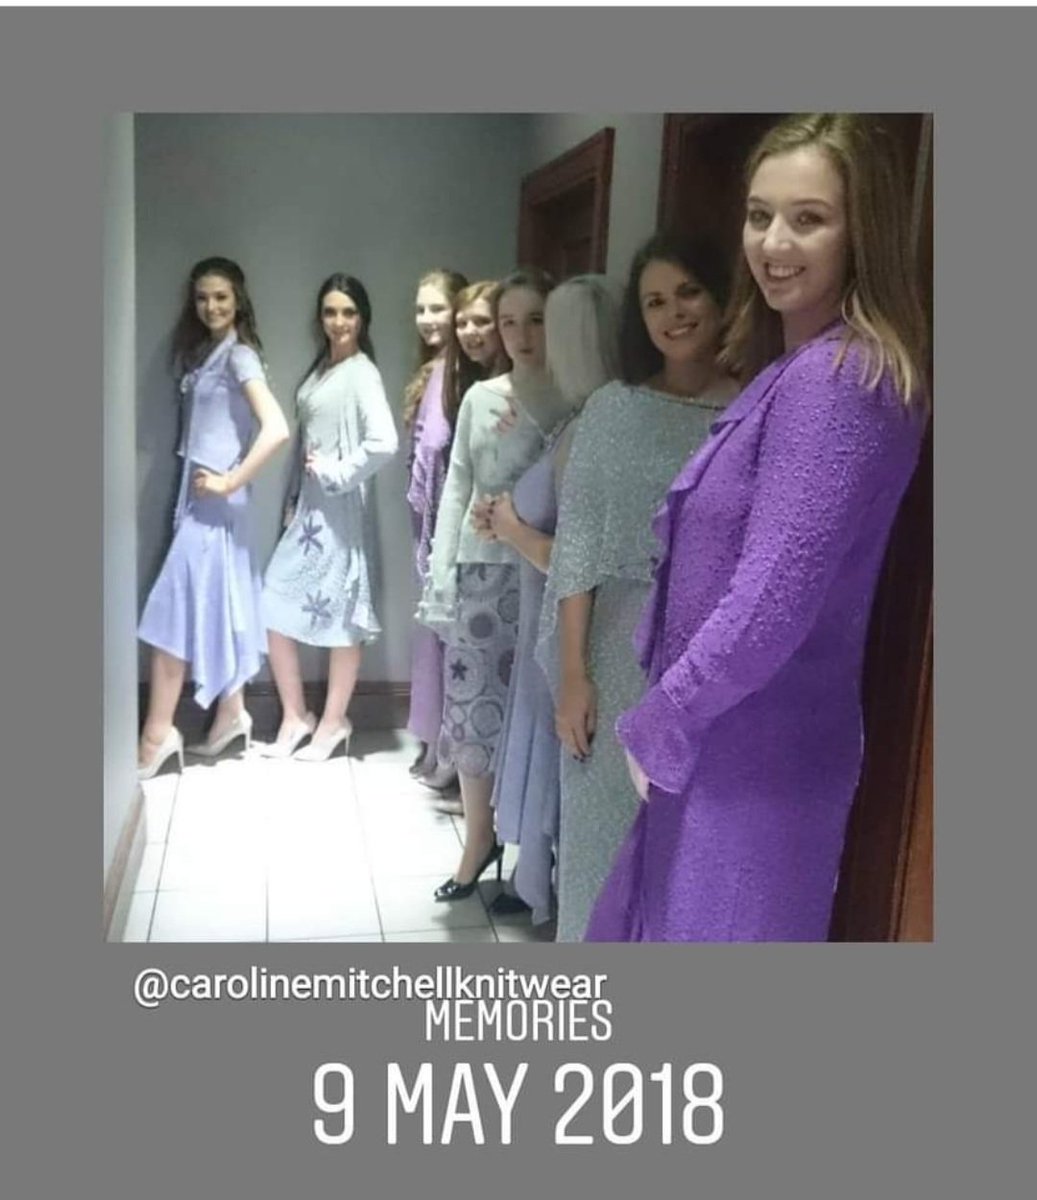 A #purple #lavender and #silver memory from Facebook this morning 💜🤍💜 Waiting to go on at a #fashionshow with models from @htmodelling #knitwear #crochet #Irishfashion #irishknitwear